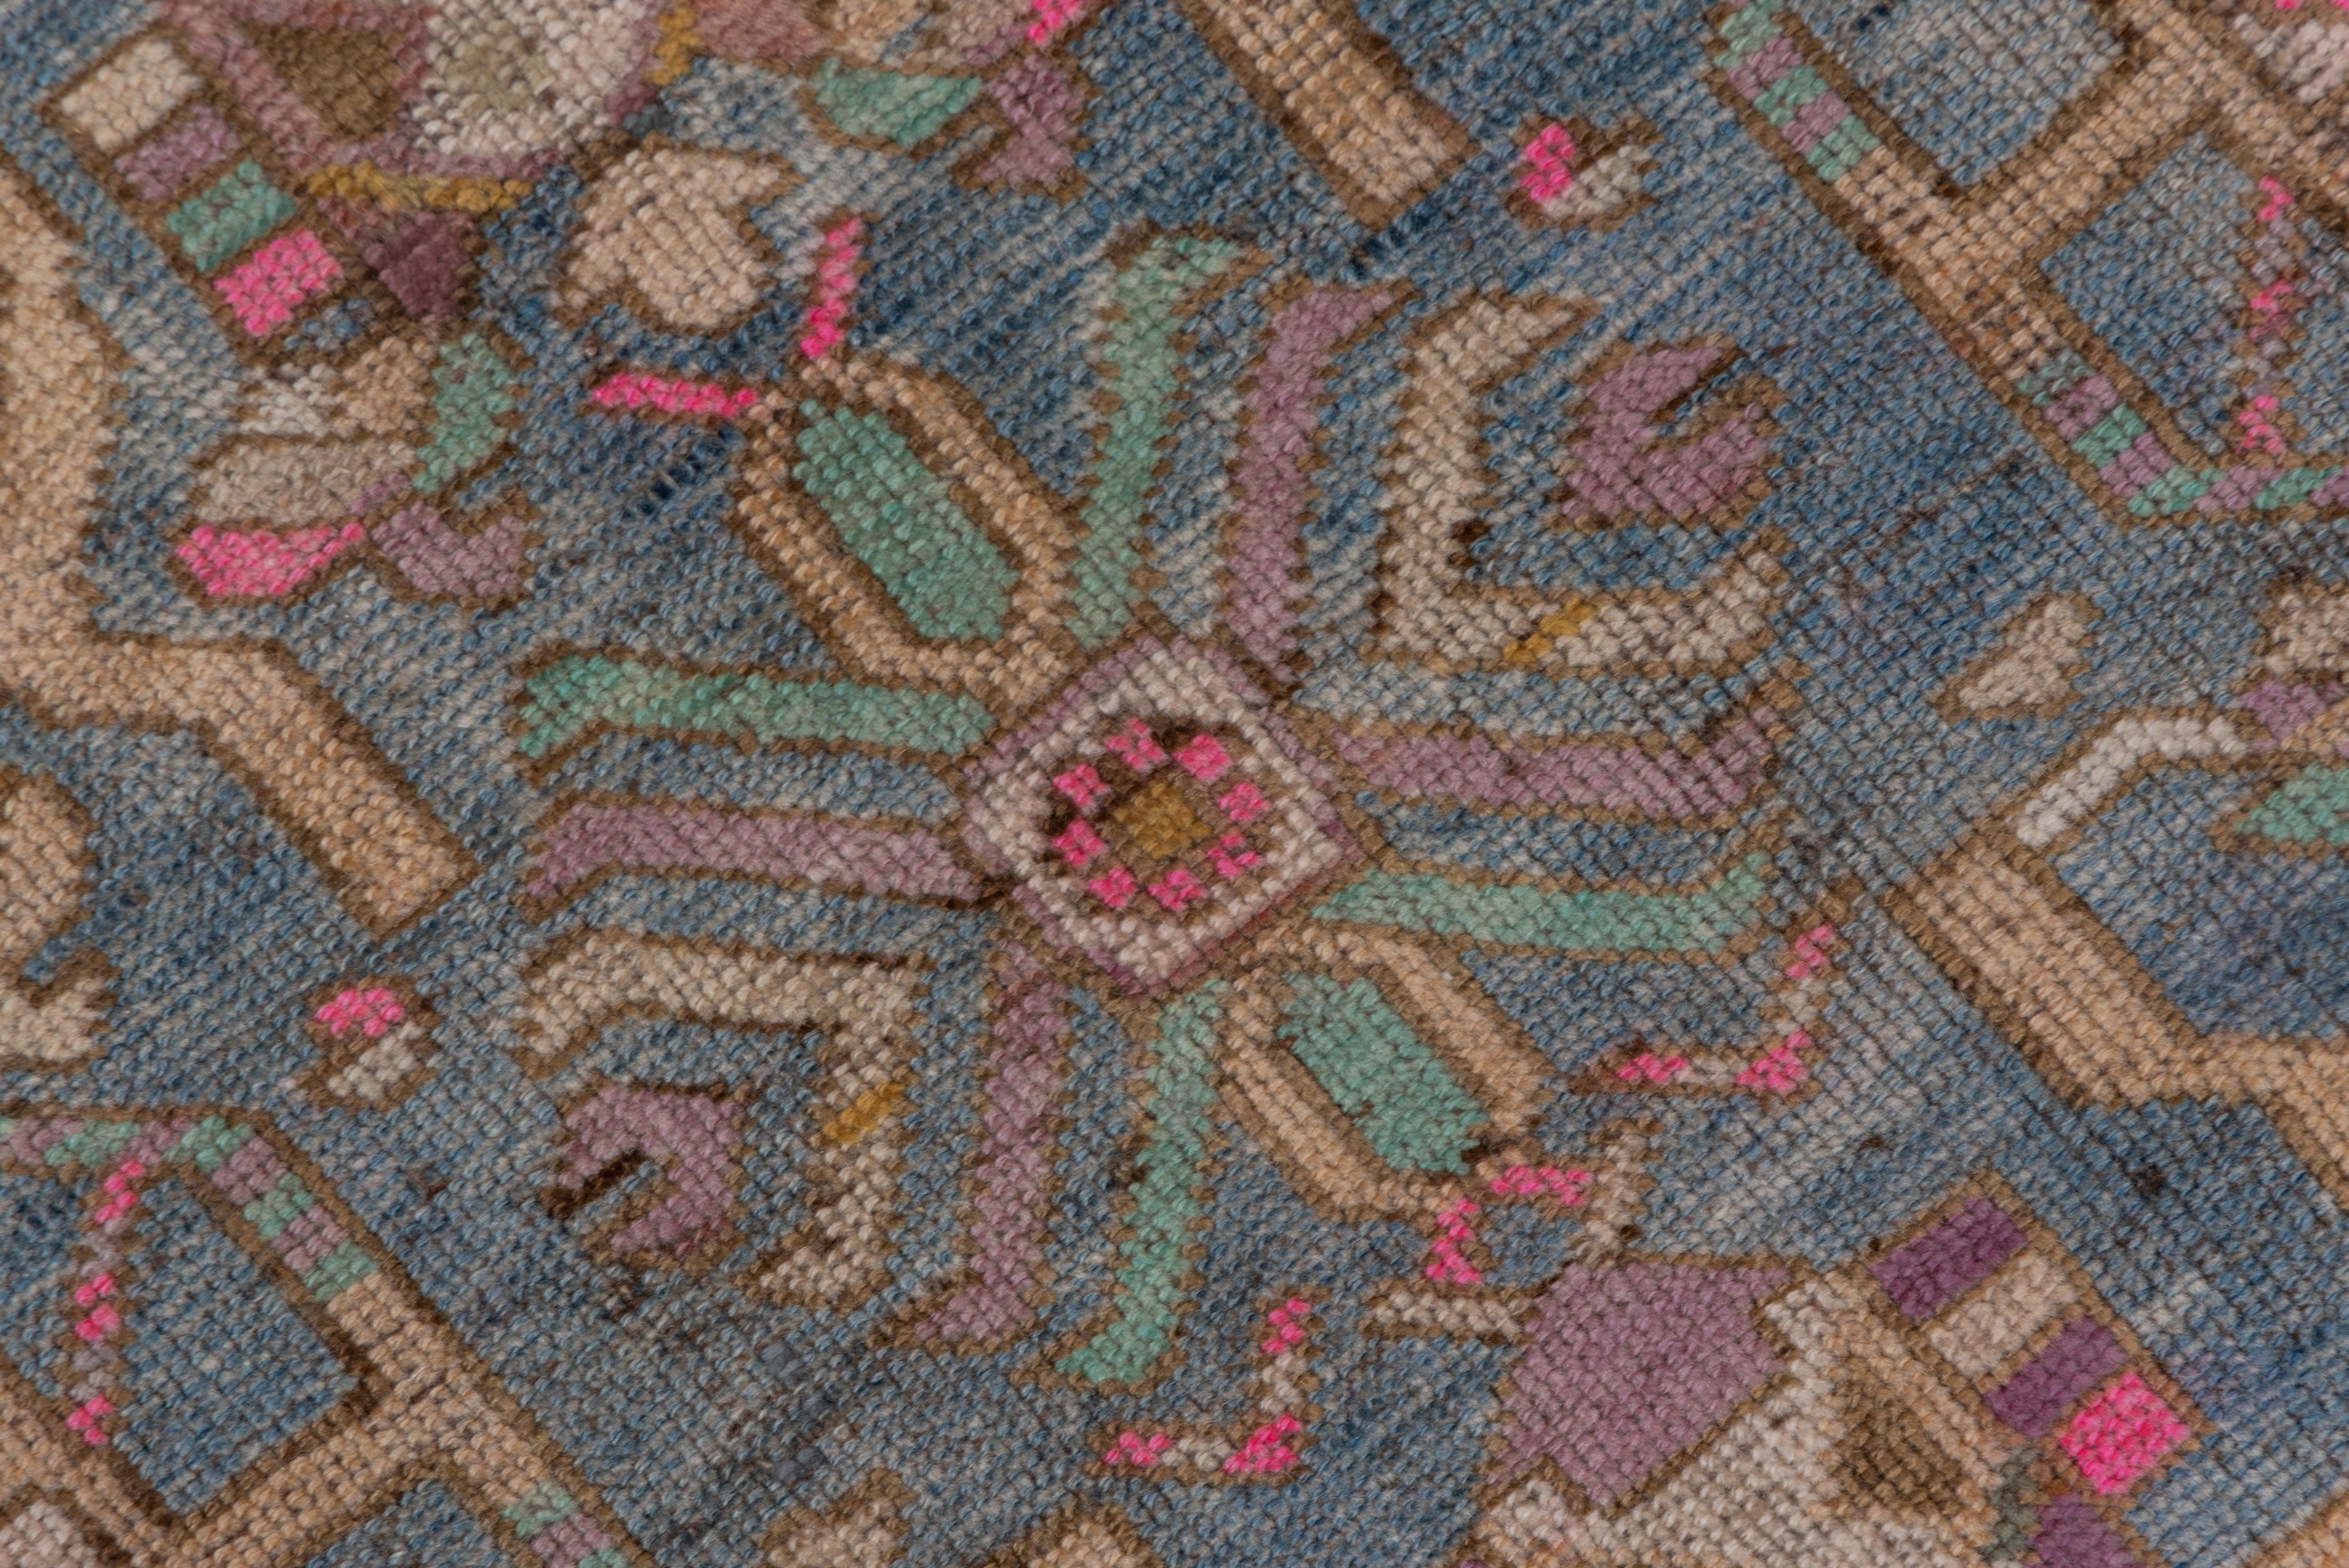 Thissouth Caucasian rug shows three touching large serrated pale blue-grey hexagons enclosing stylized palmettes and right angle vine sections, all on the open sandy straw ground, and set within an abrashed rosette and double vine/octagon rust-brown